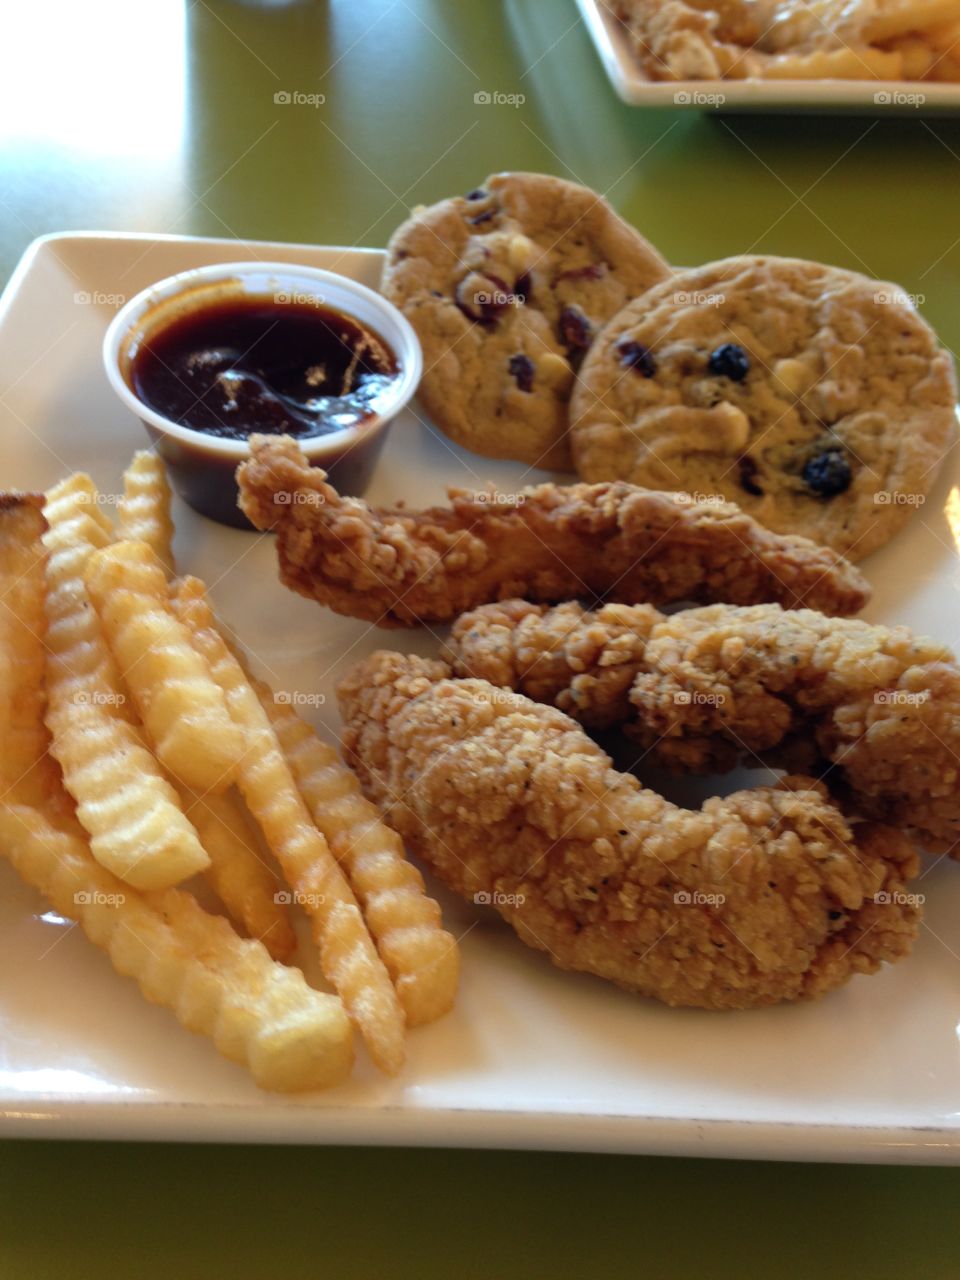 Plate of fried foods including breaded chicken tenders, crinkle cut French fries, and chocolate chip cookies 